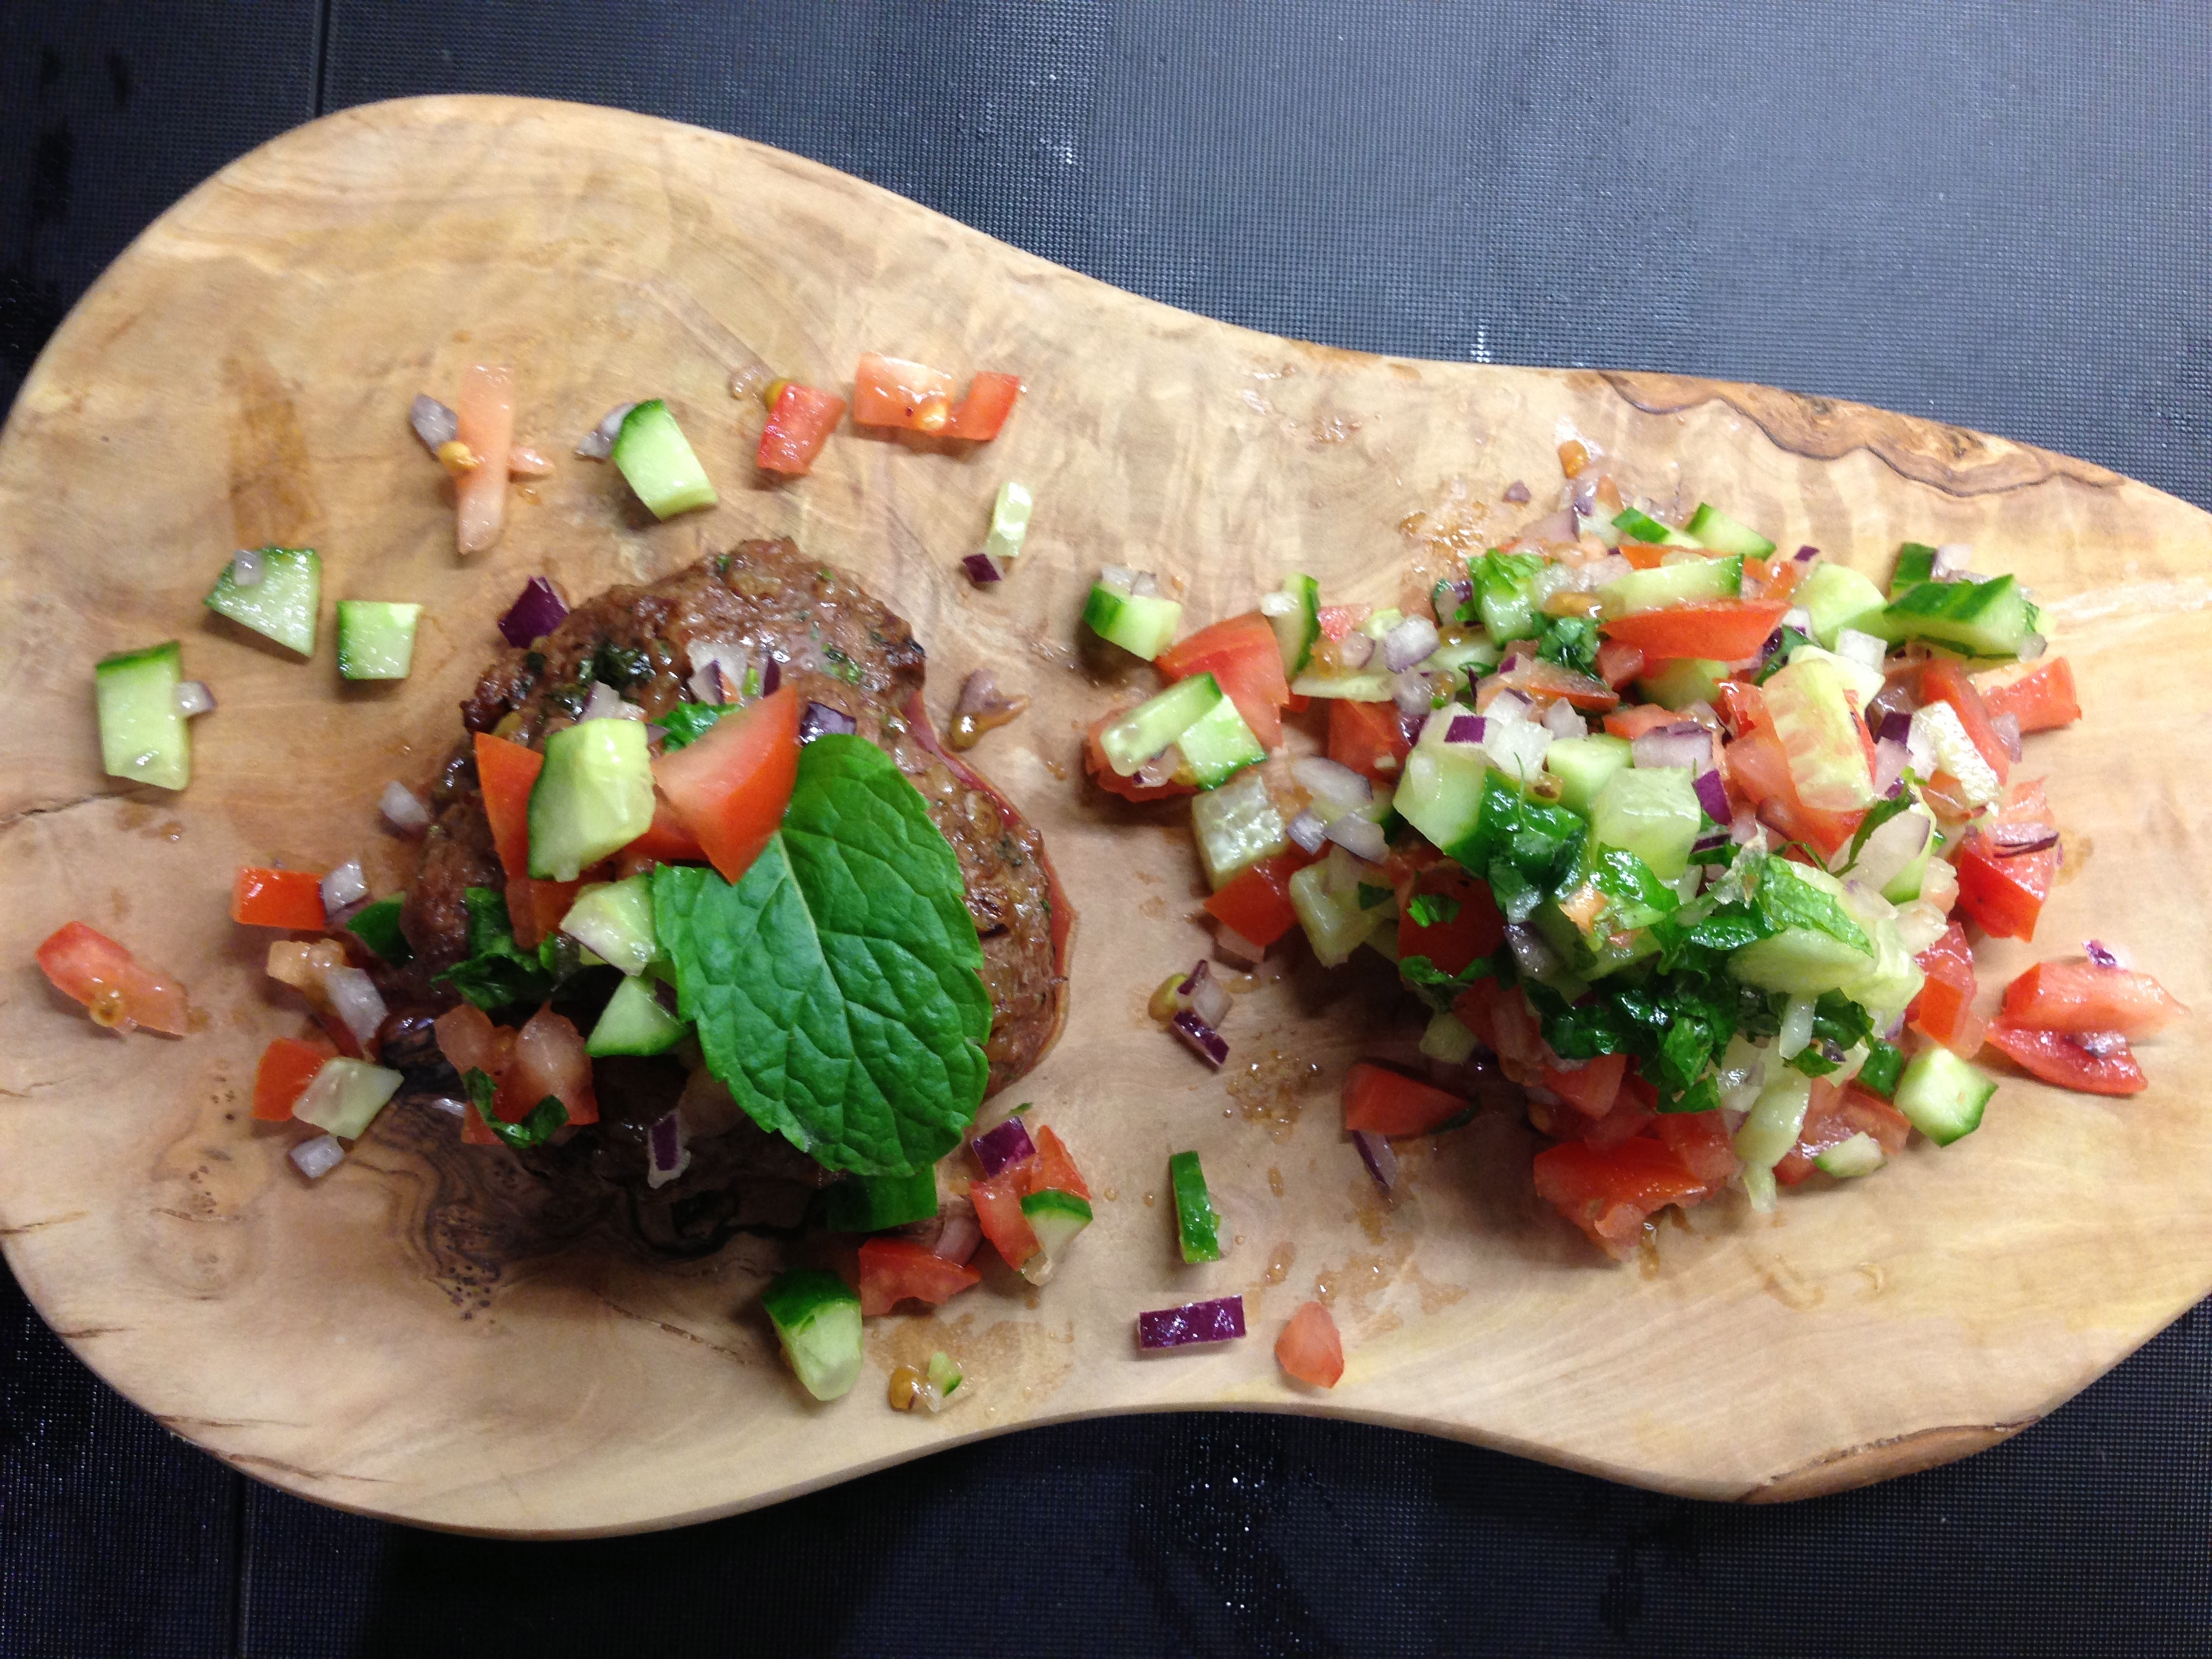 Lamb Burger with Tomato, Cucumber and Mint Salad from Francesca Fox